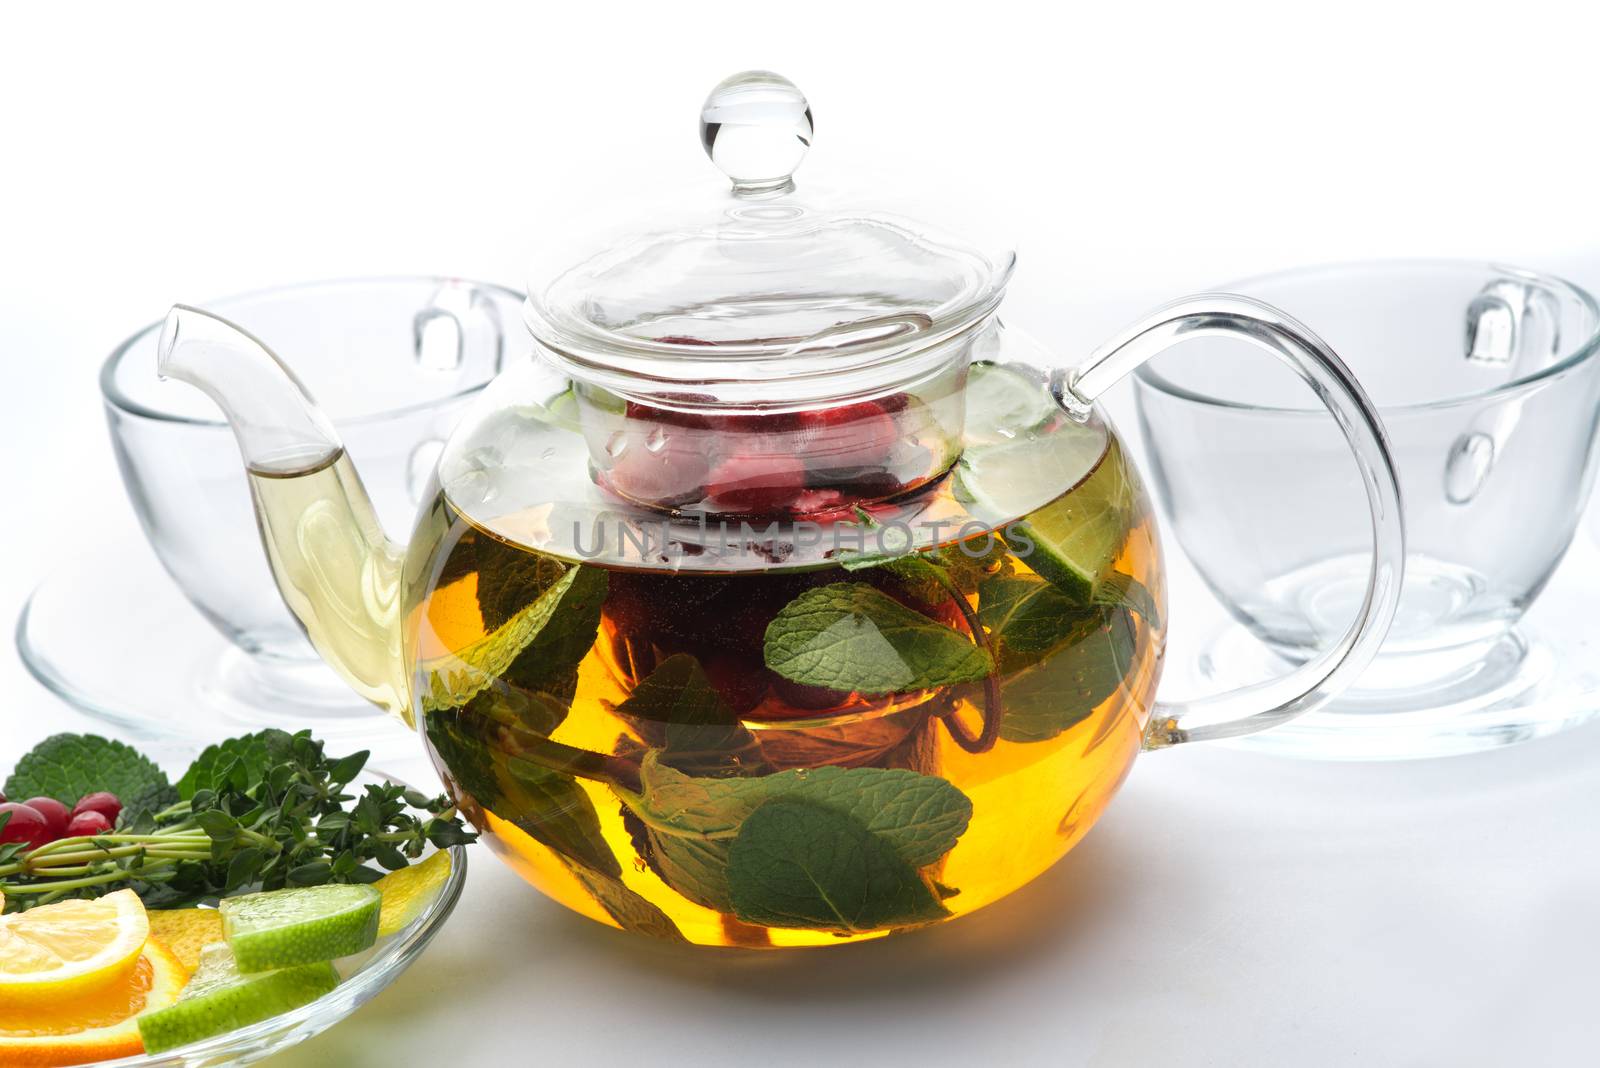 Fruit tea with mint leaves in a teapot by shivanetua